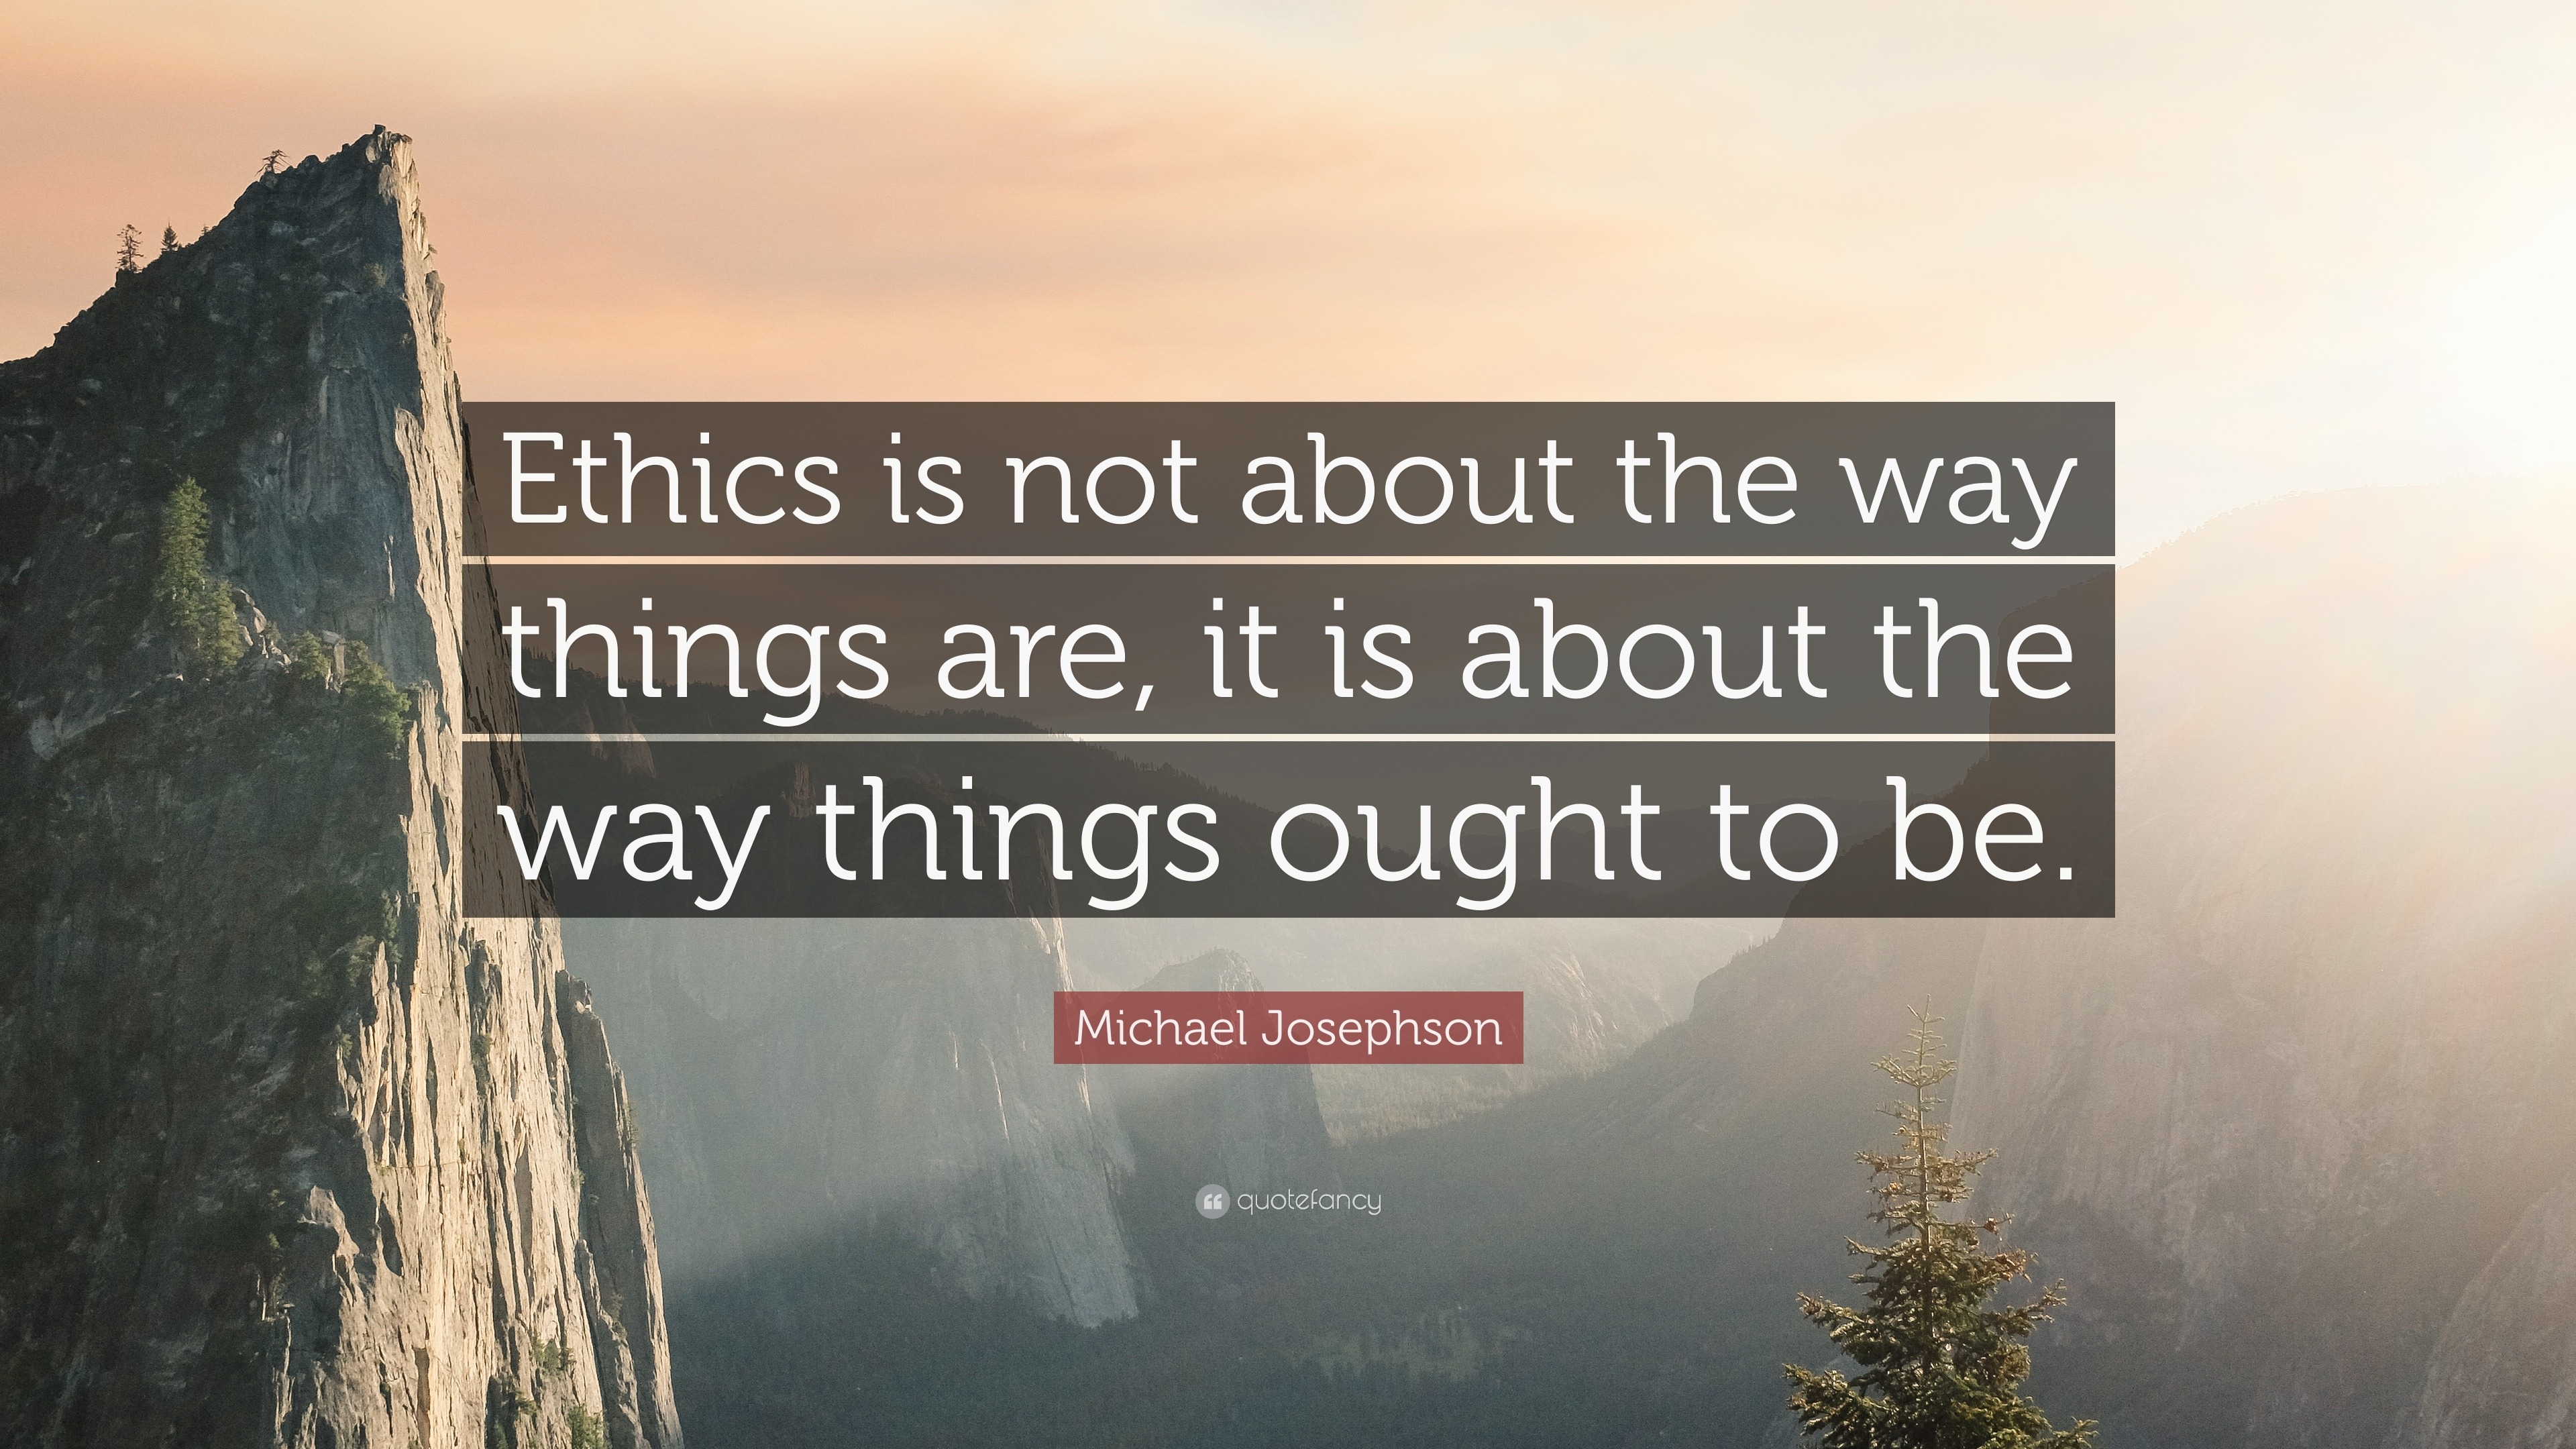 Michael Josephson Quote: “Ethics is not about the way things are, it is